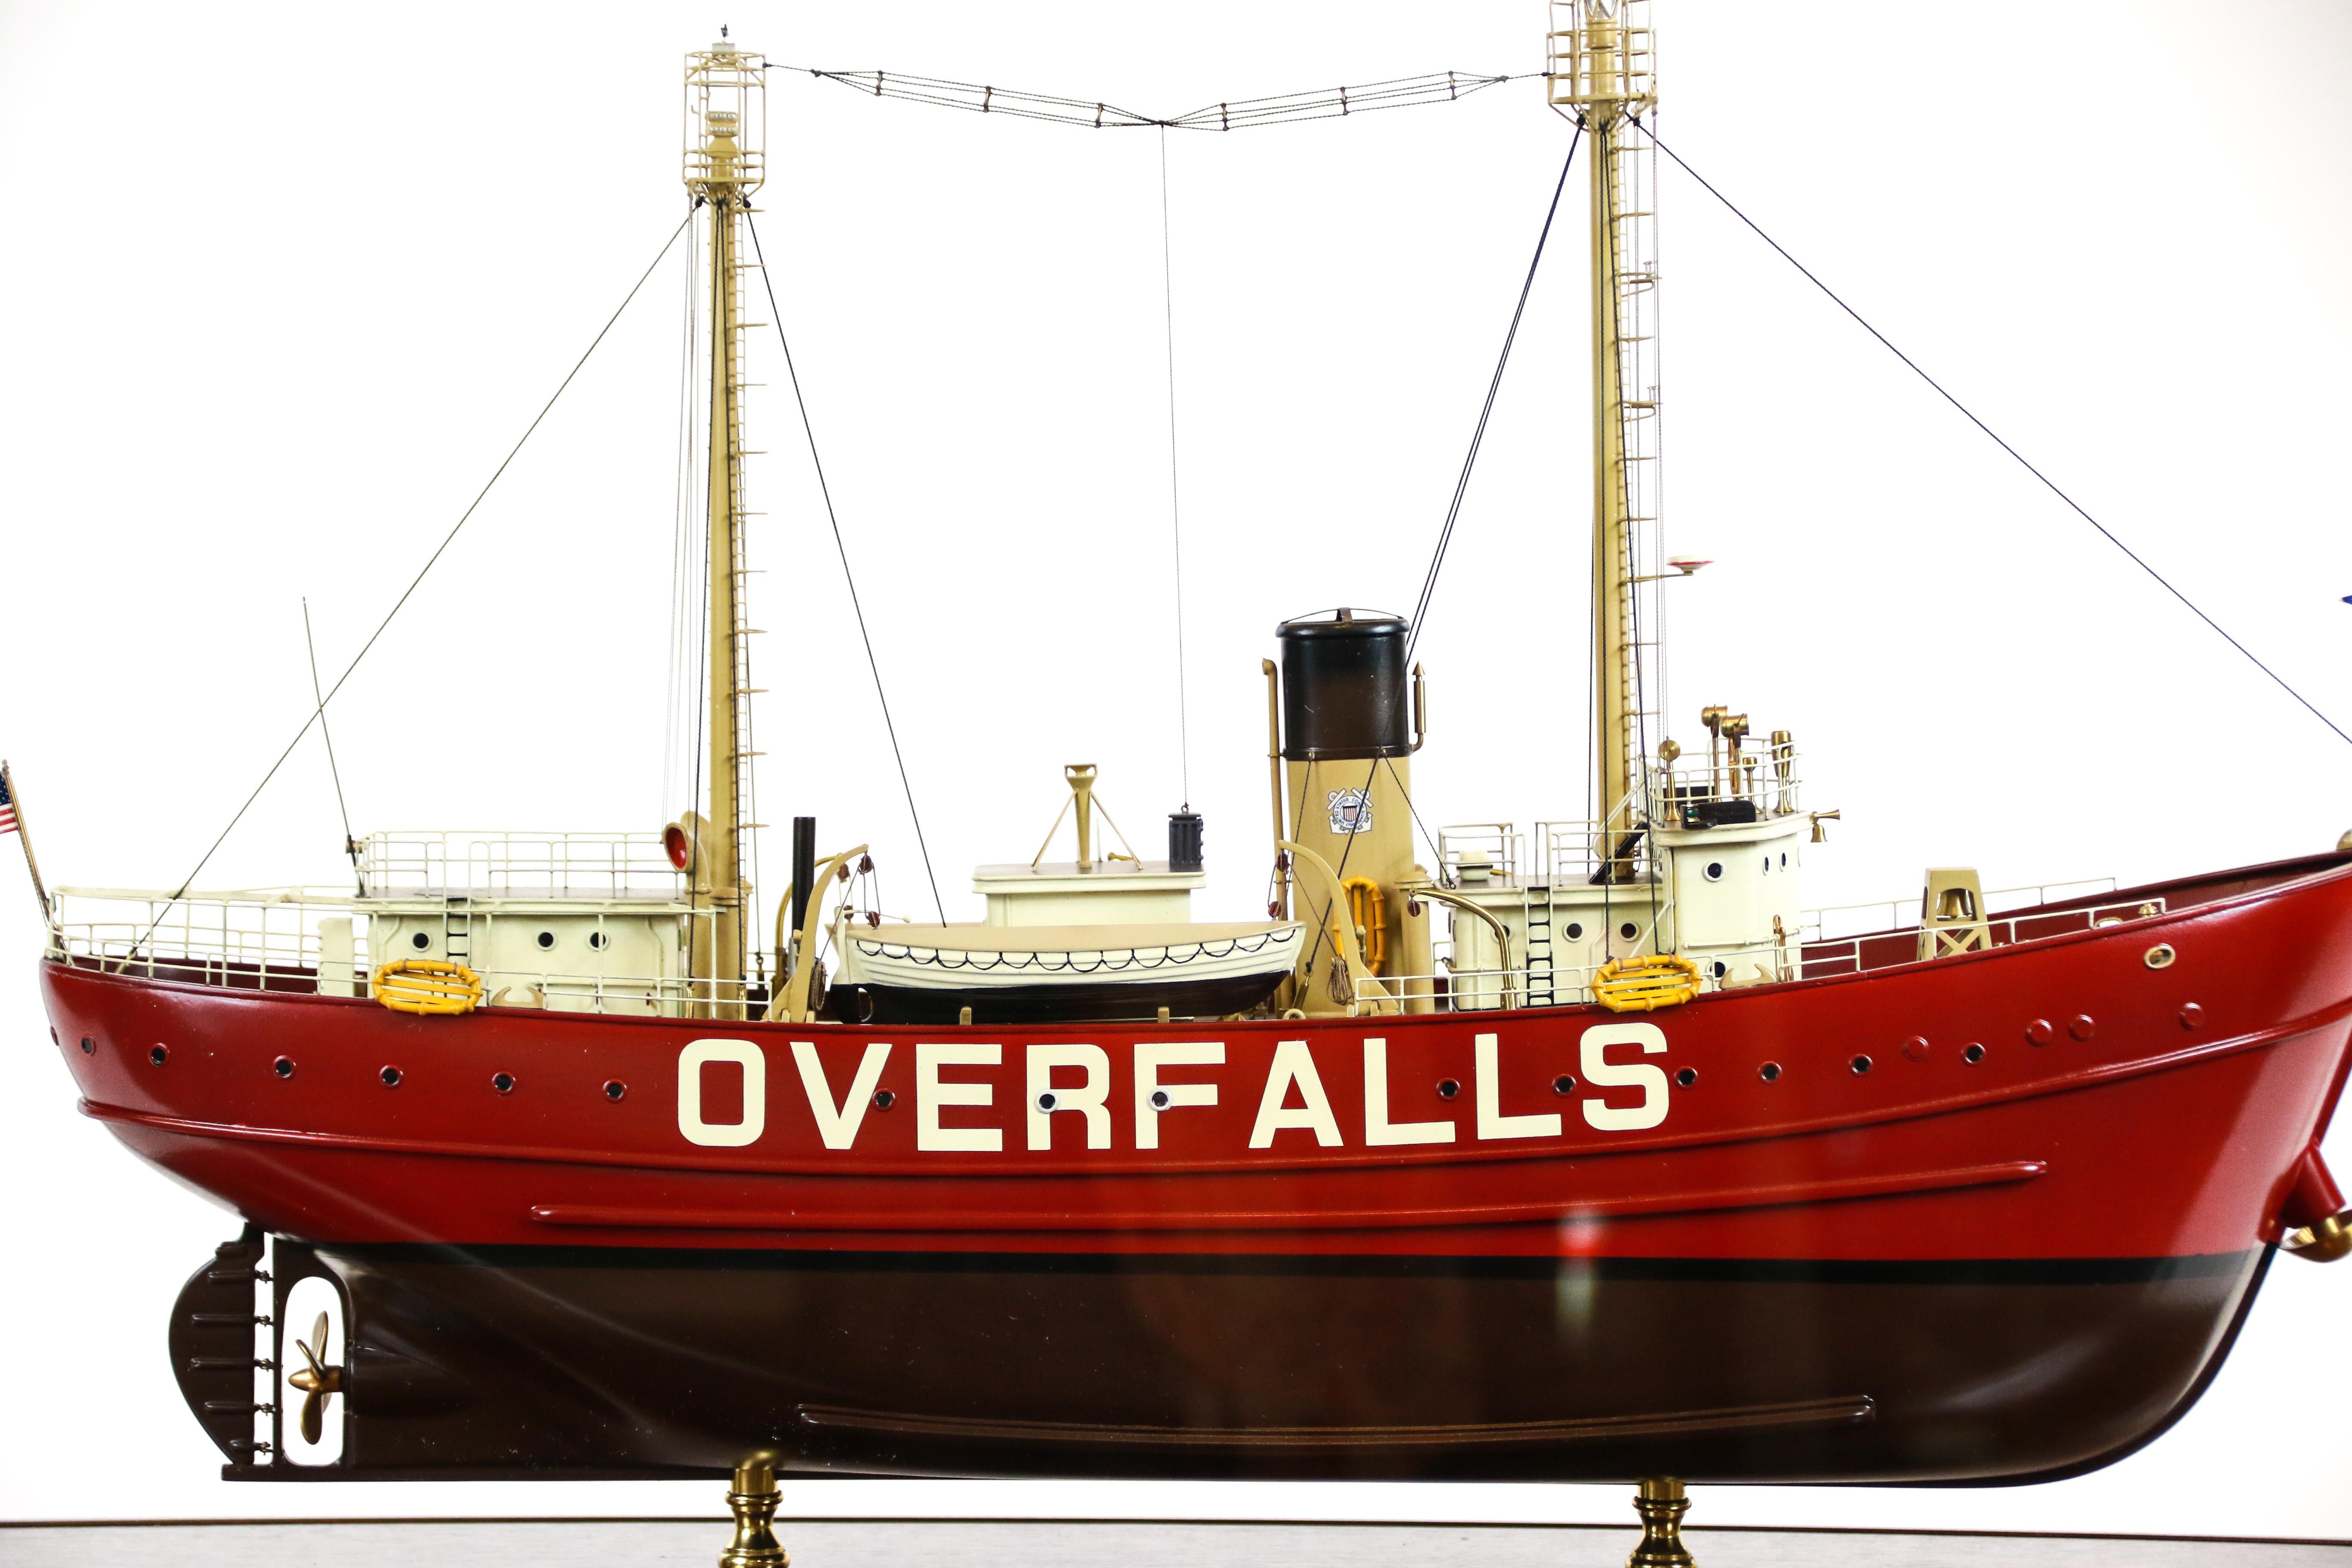 Ligthship Overfalls was launched in 1938 as LV 118. Built in East Boothbay, Maine, Overfalls was stationed at Cornfield Point, Connecticut from 1938-1957; Cross Rip, Massachusetts from 1958-1962 and Boston from 1962-1972 after which she was